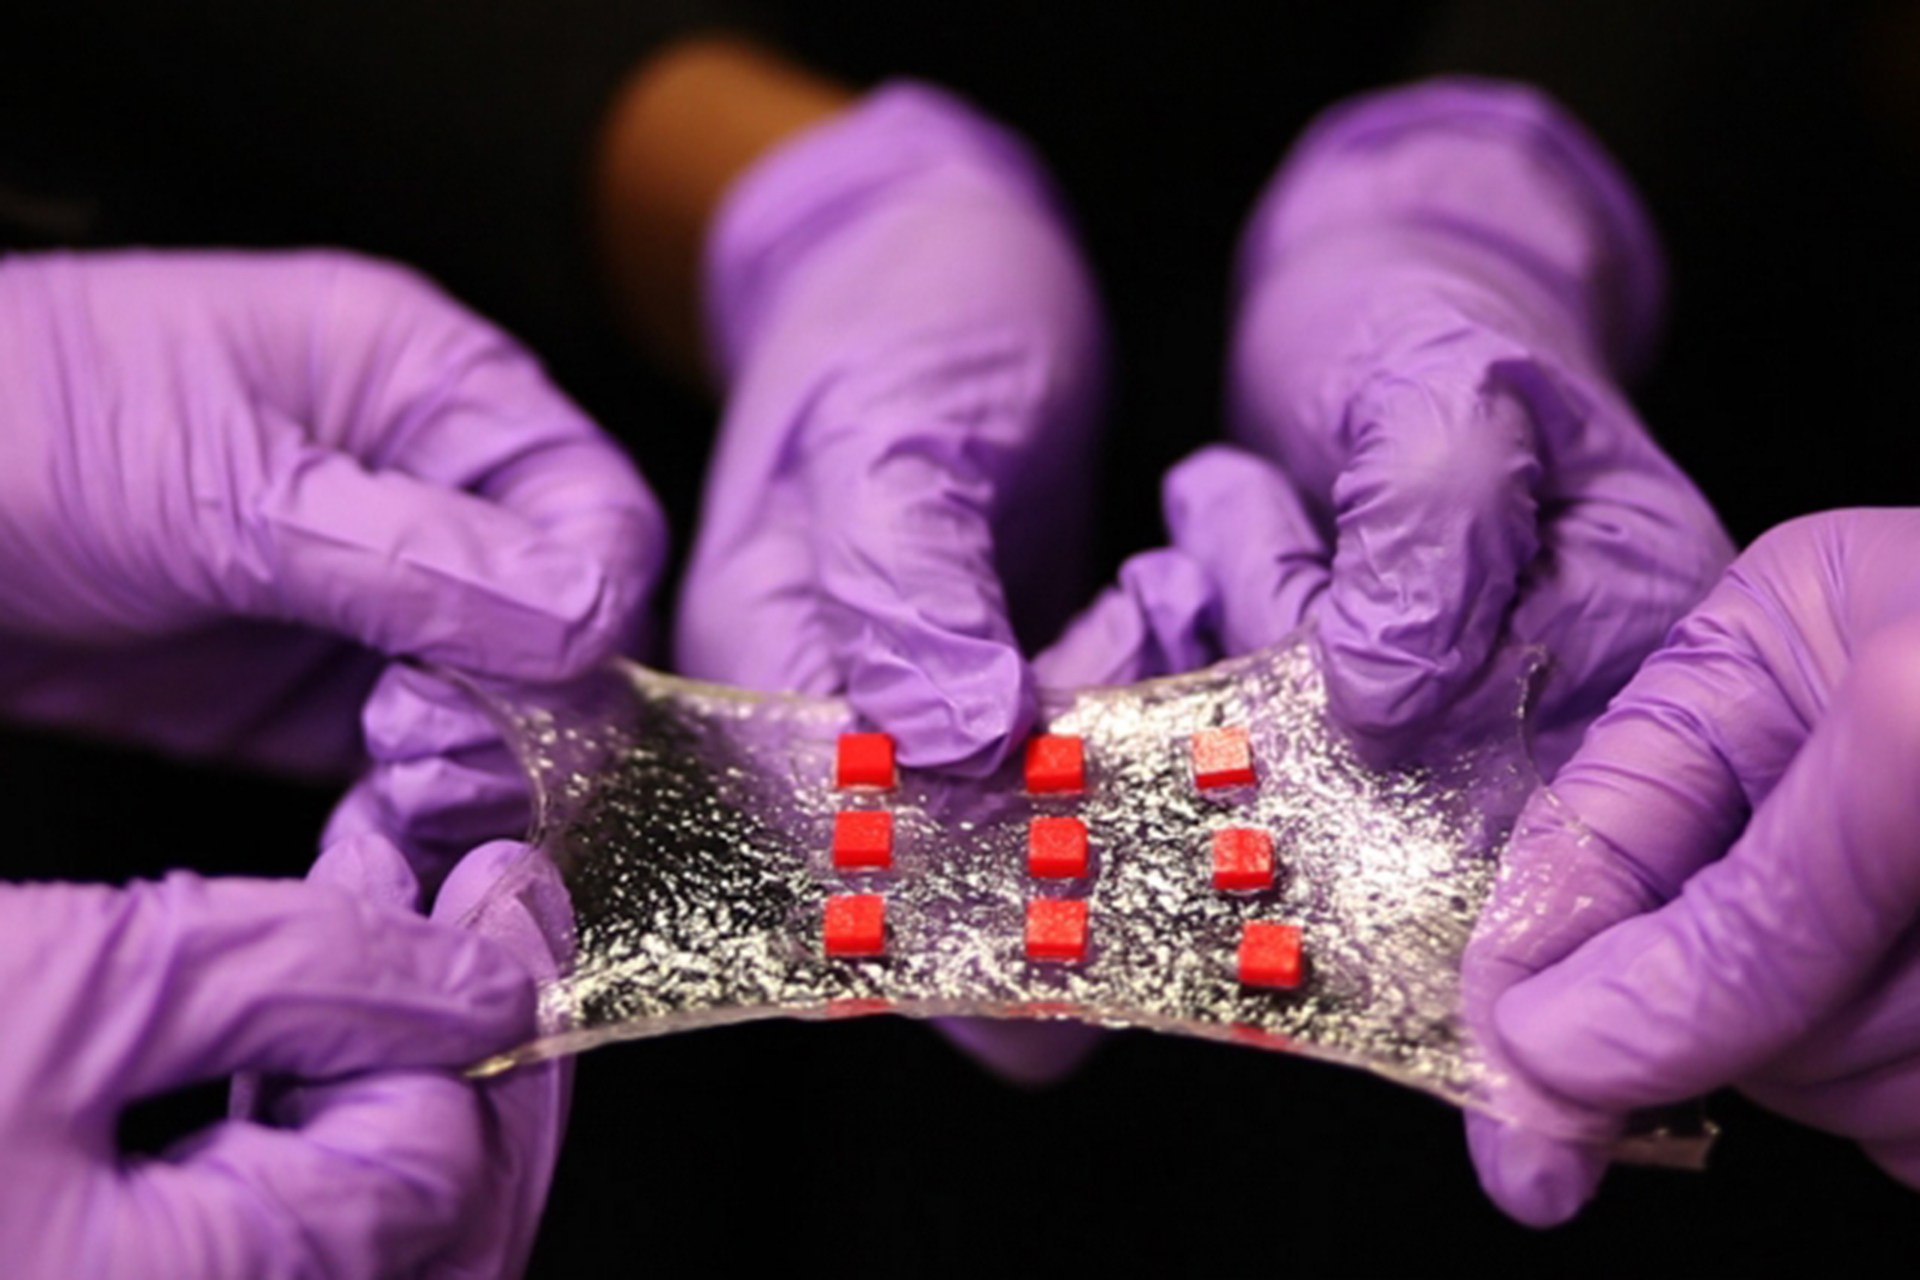 Have Scientists at MIT Successfully Designed the Band Aid of the Future?